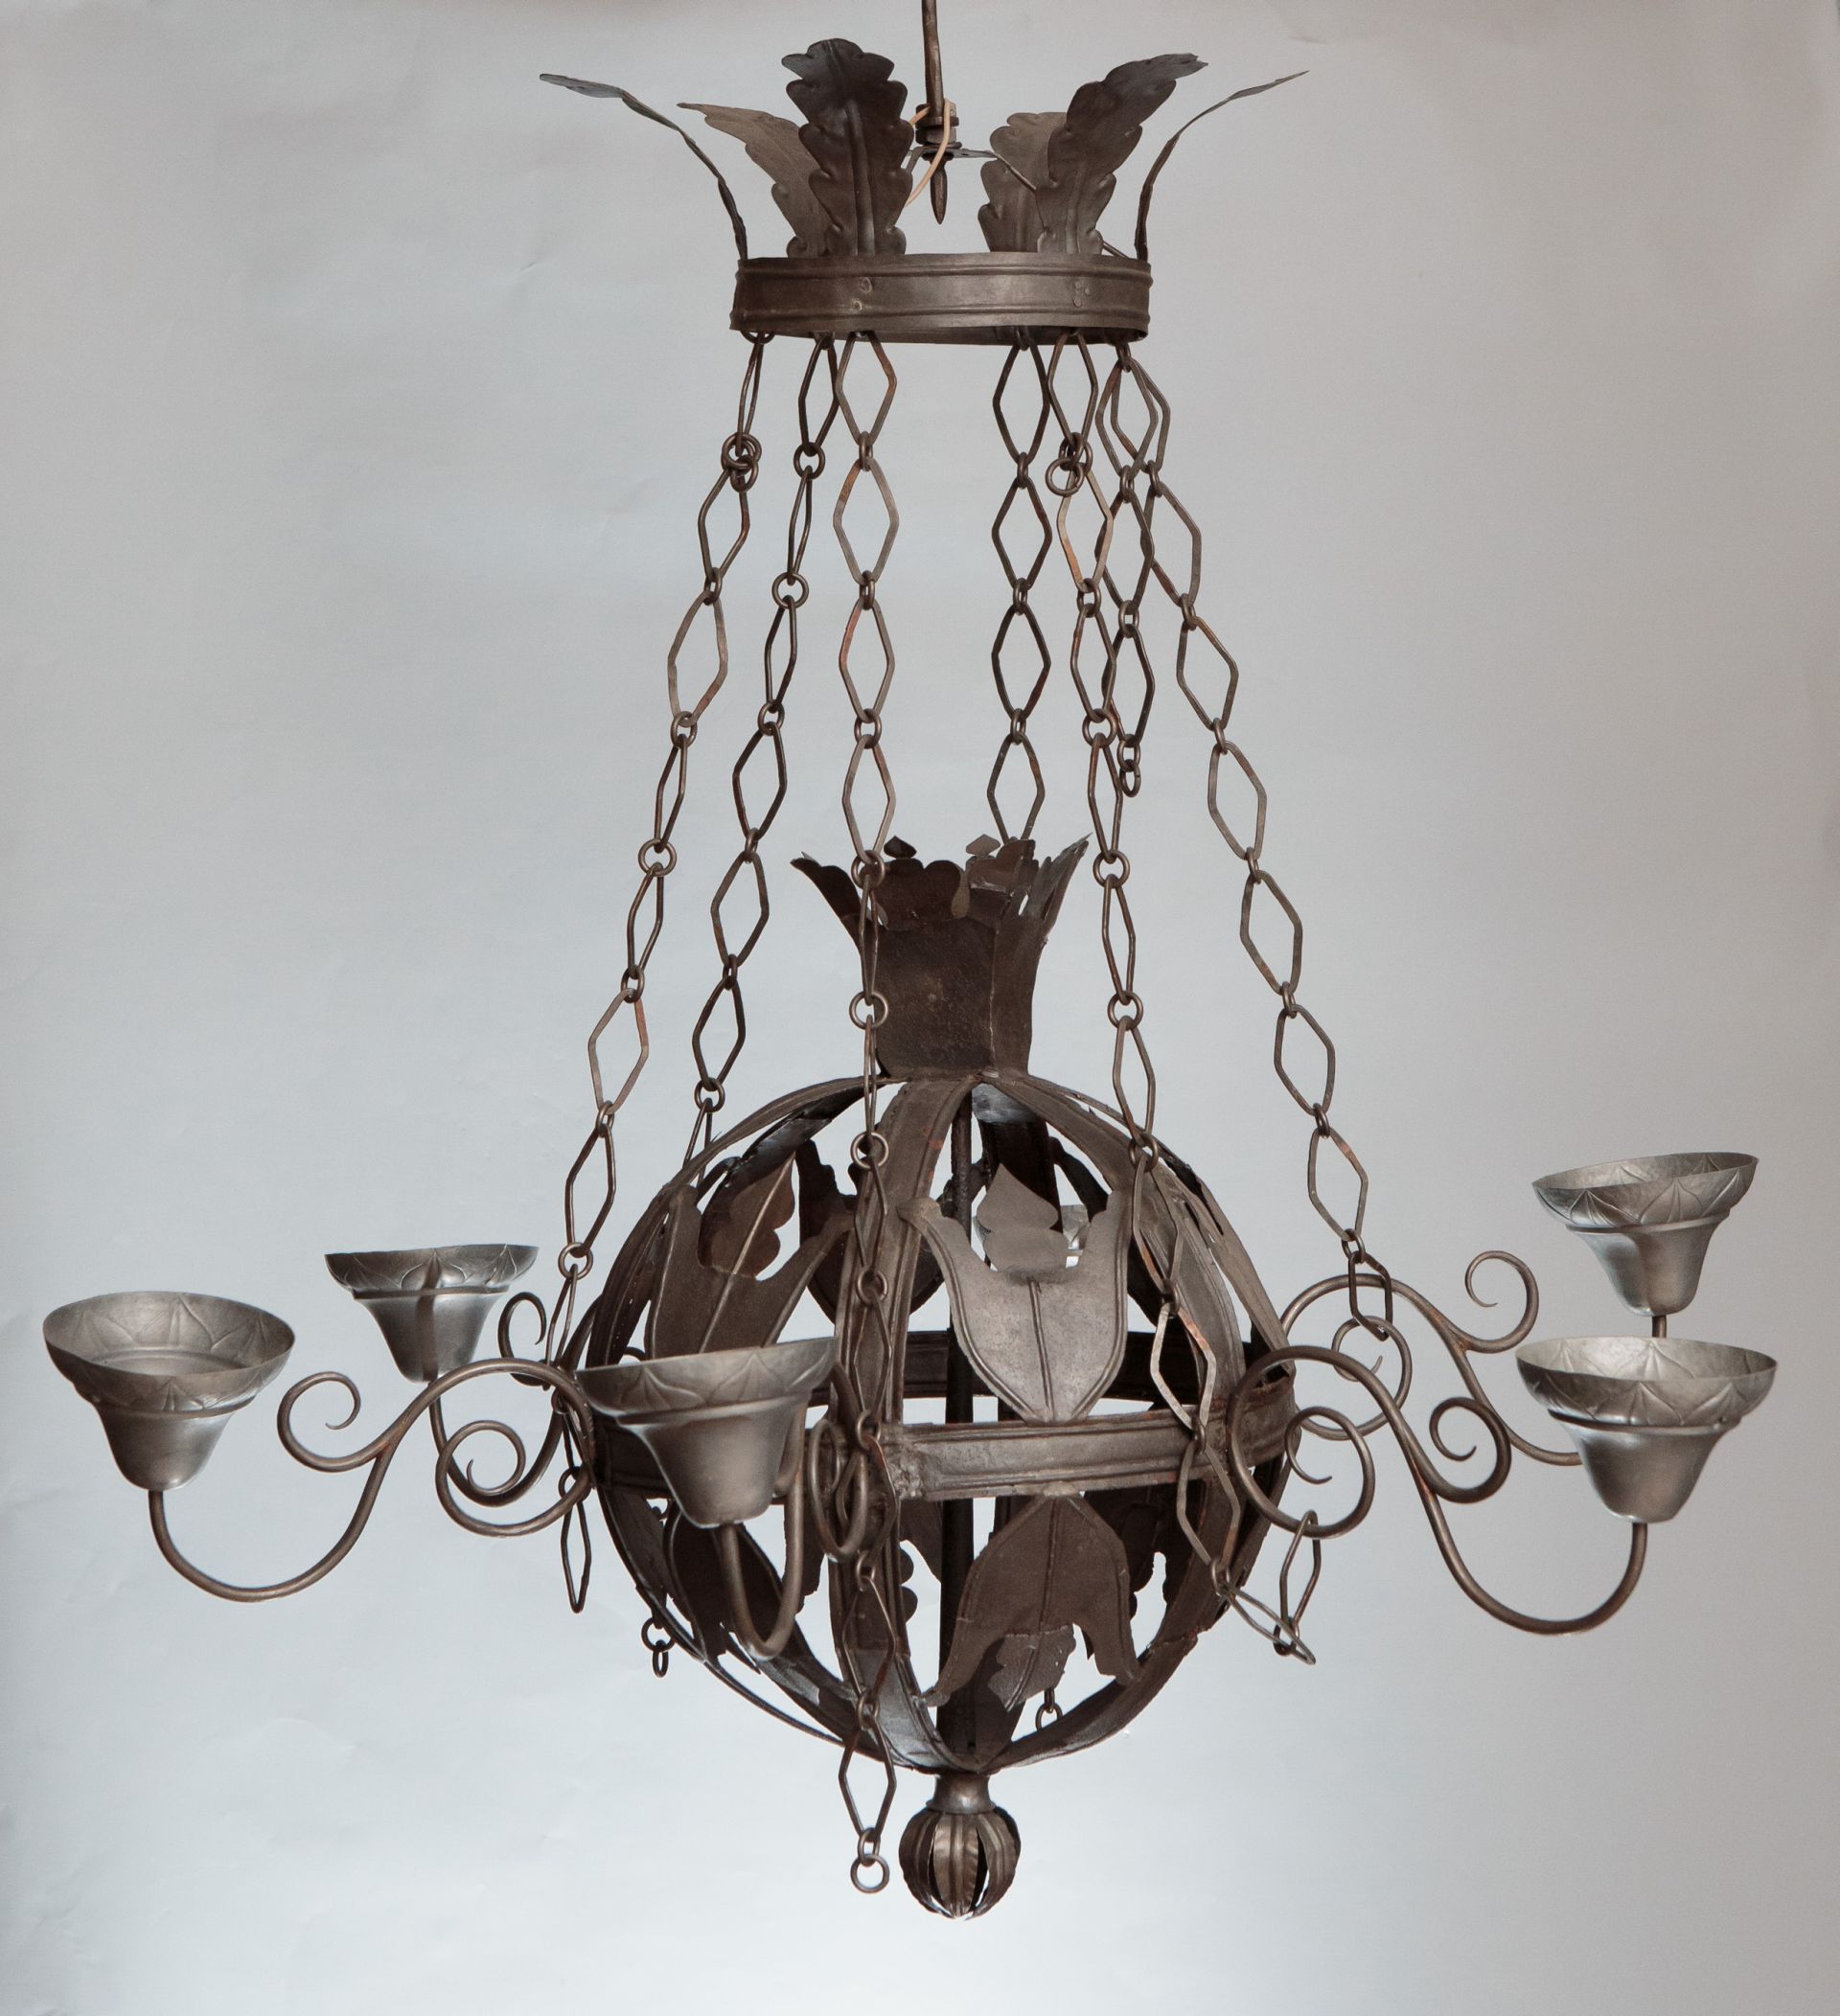 Chandelier, 1600–1650, Lithuanian National Museum of Art, TM-522. Photo by Tomas Kapočius, 2017